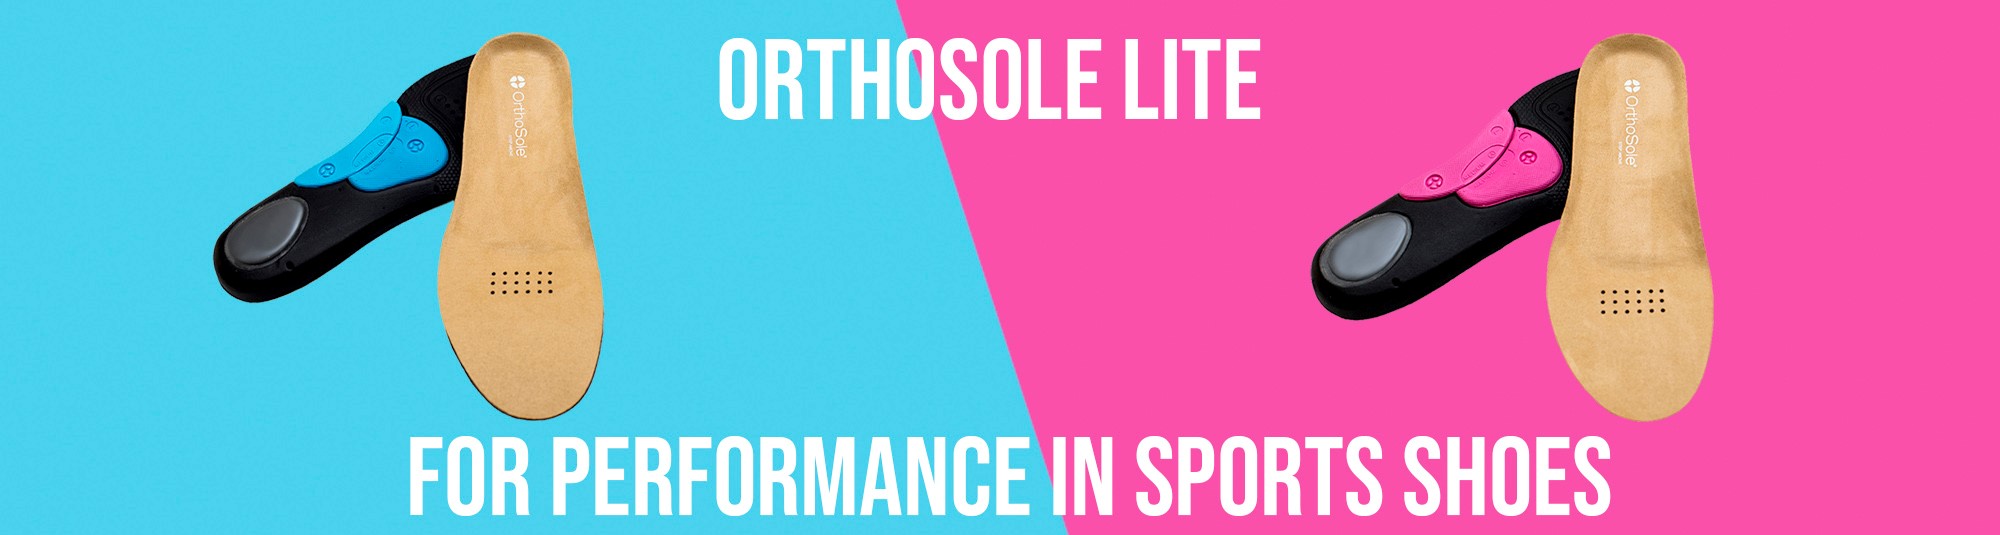 OrthoSole Lite Insoles for Performance in Sporting Footwear